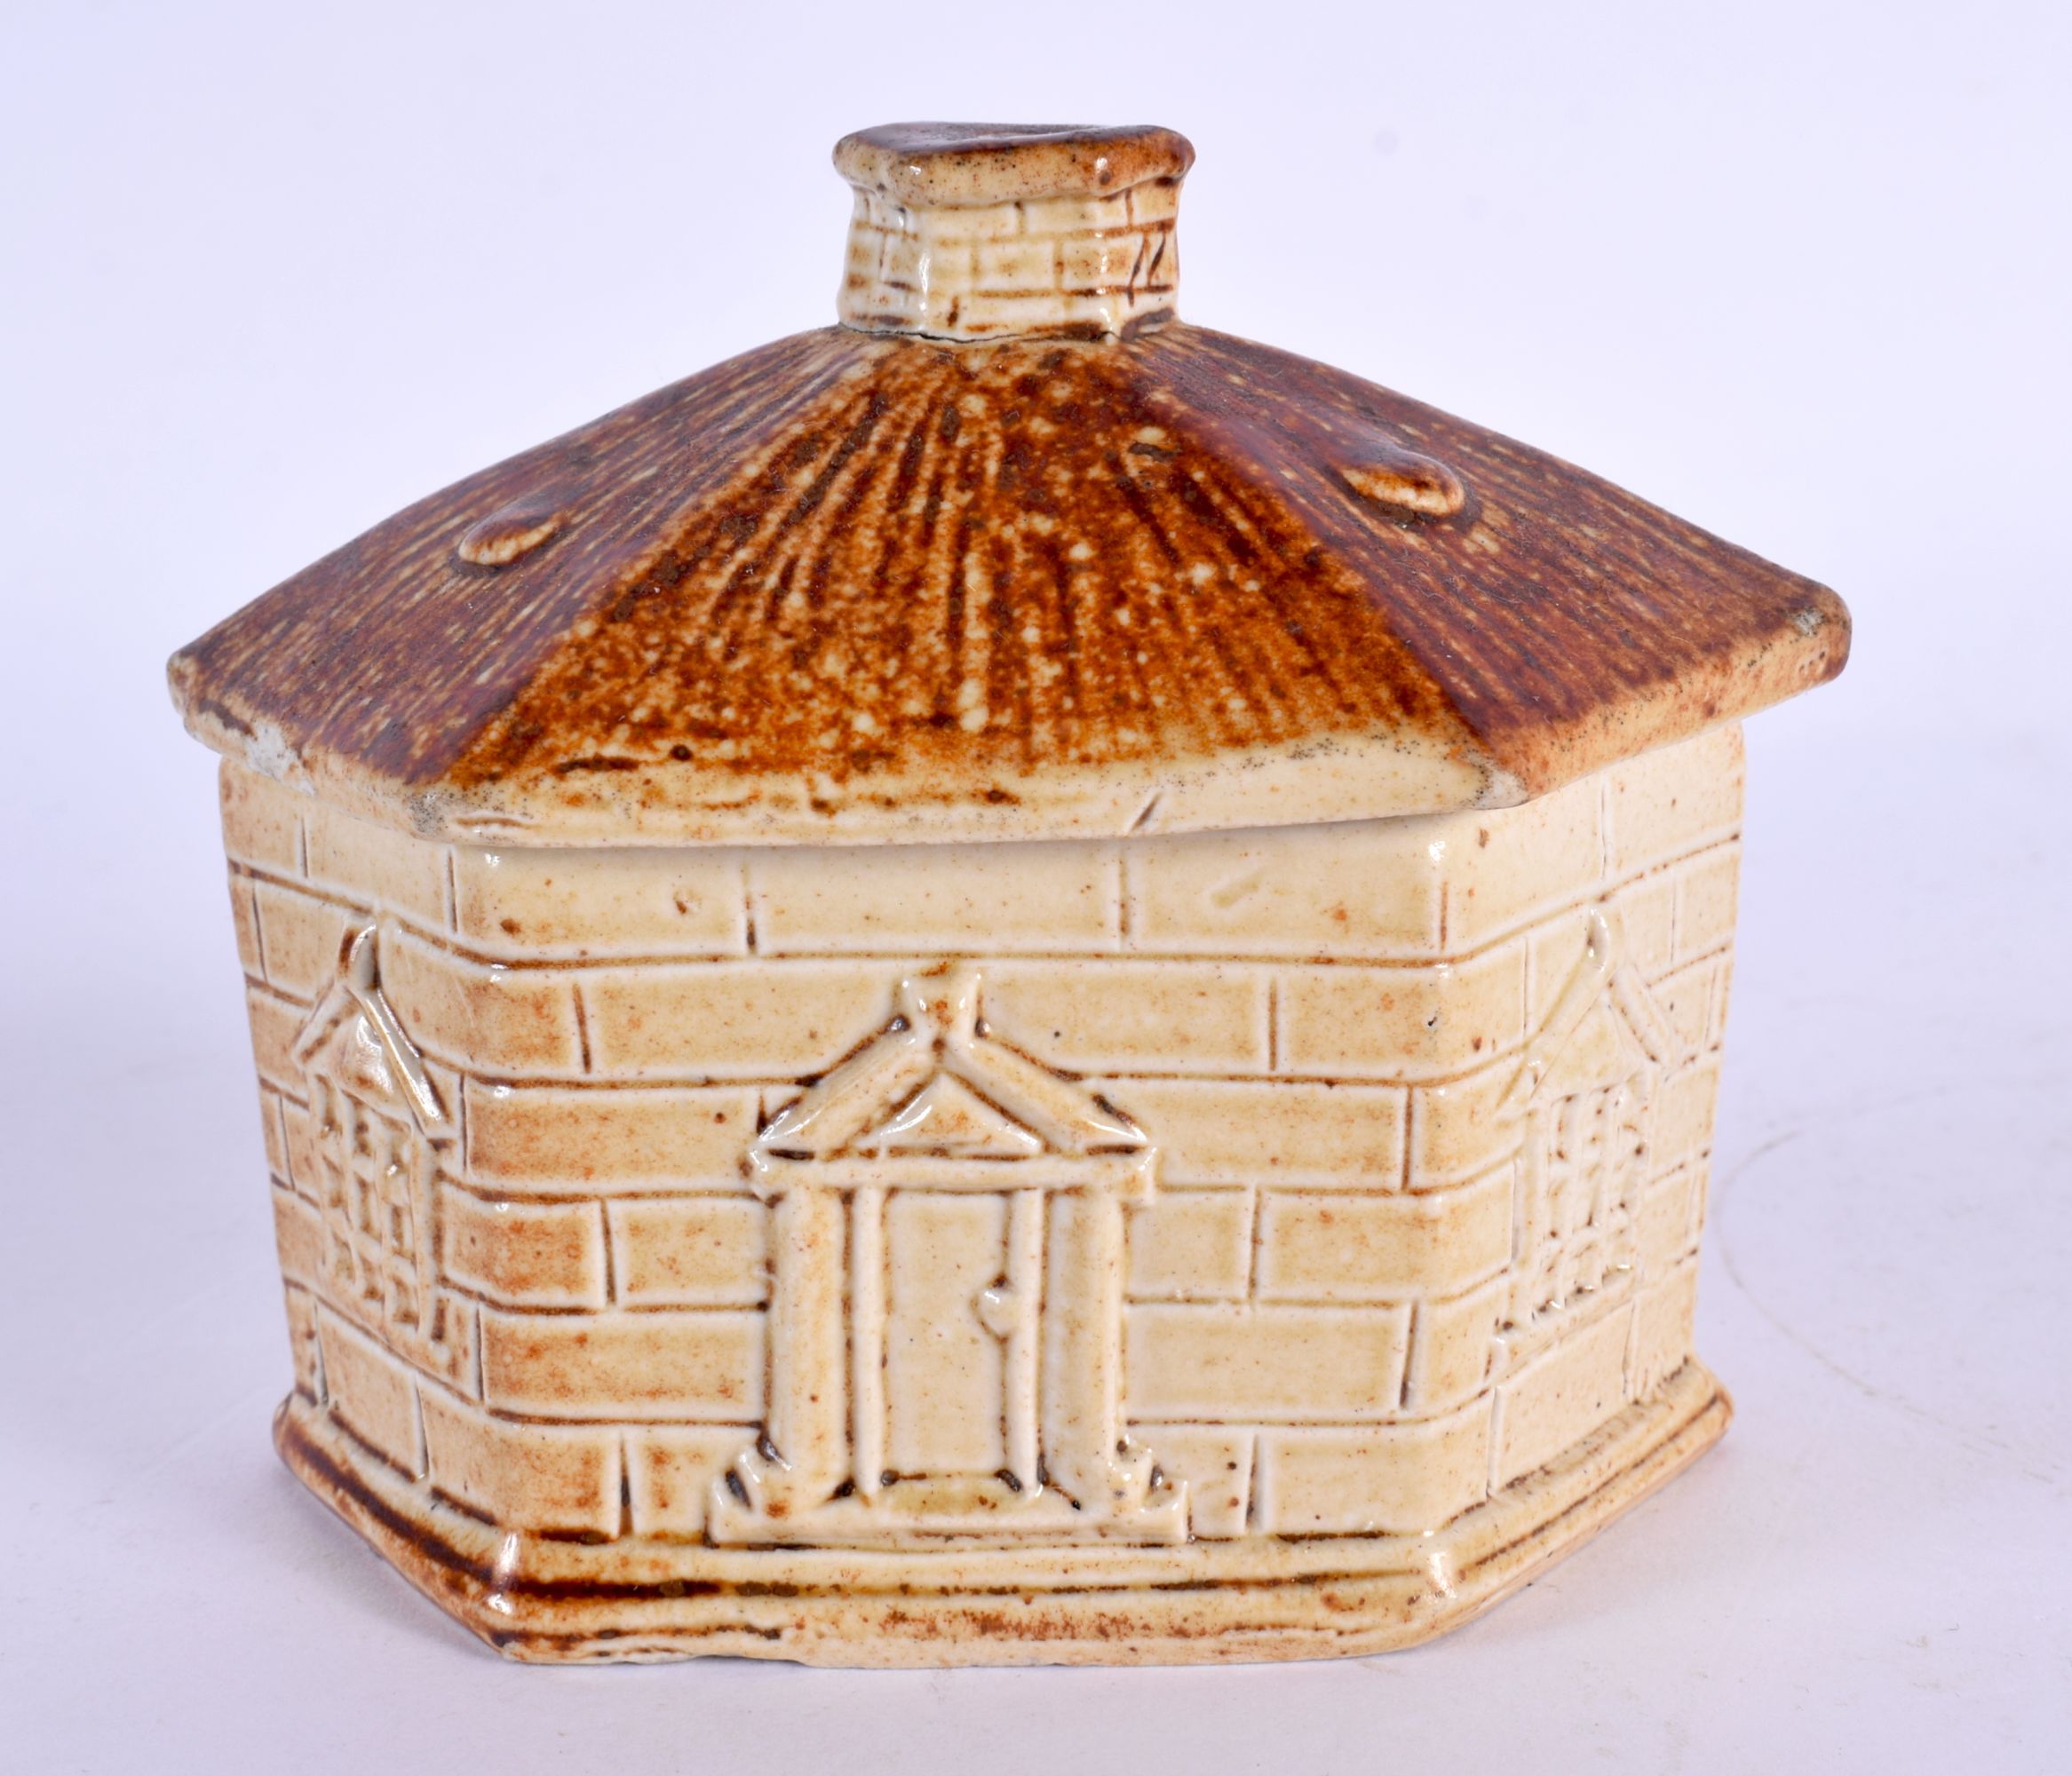 A RARE 19TH CENTURY ENGLISH SALT GLAZED BOX AND COVER formed as a house. 11 cm x 9 cm.